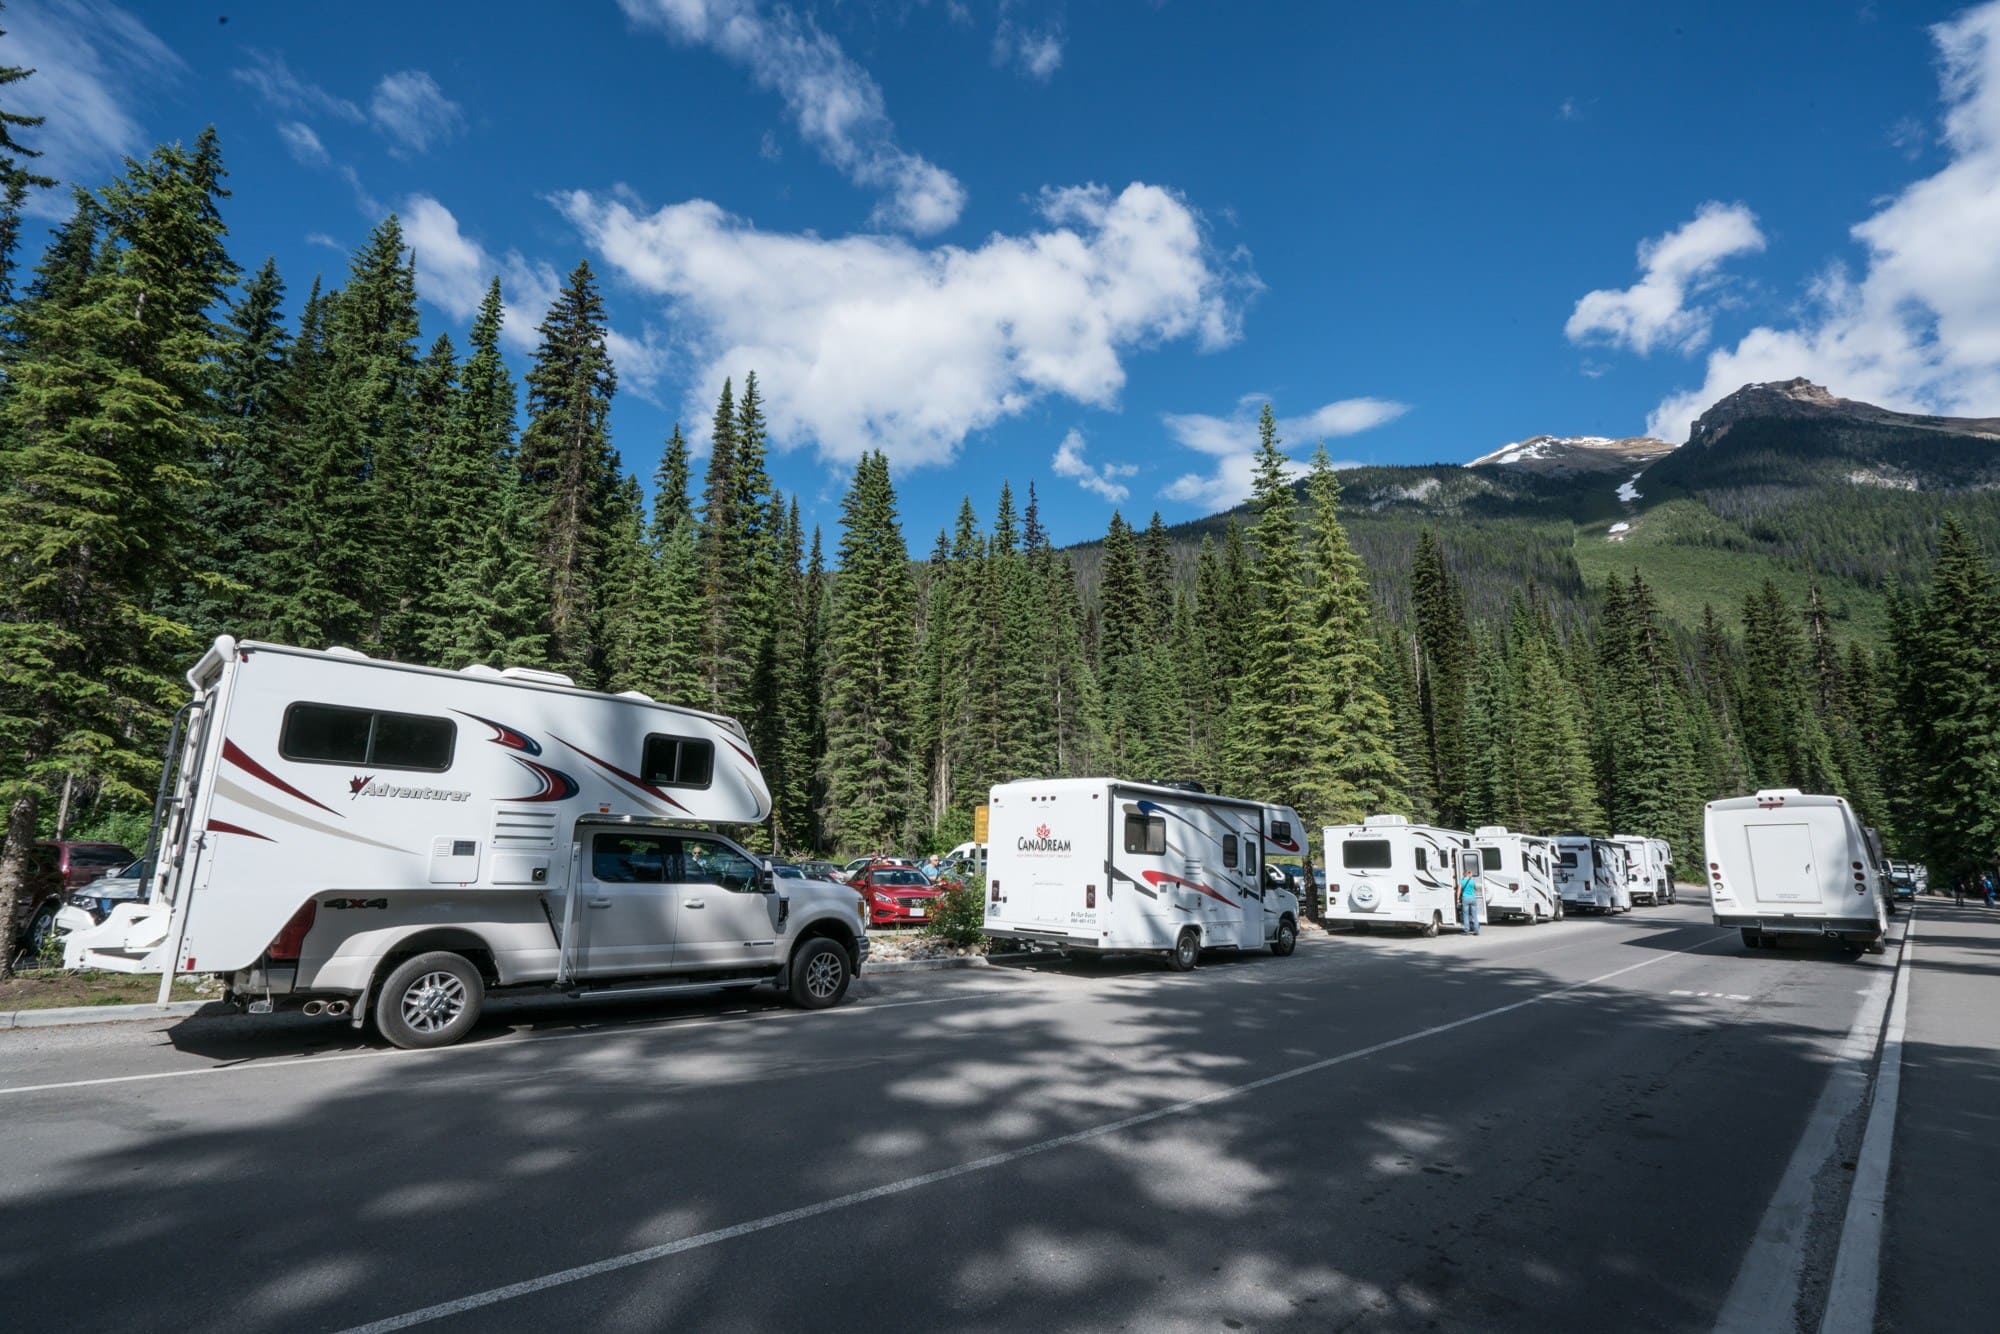 Get the details on the best Banff, Jasper, & Yoho camping with information on reservations, overflow camping, and convenient places to stay.